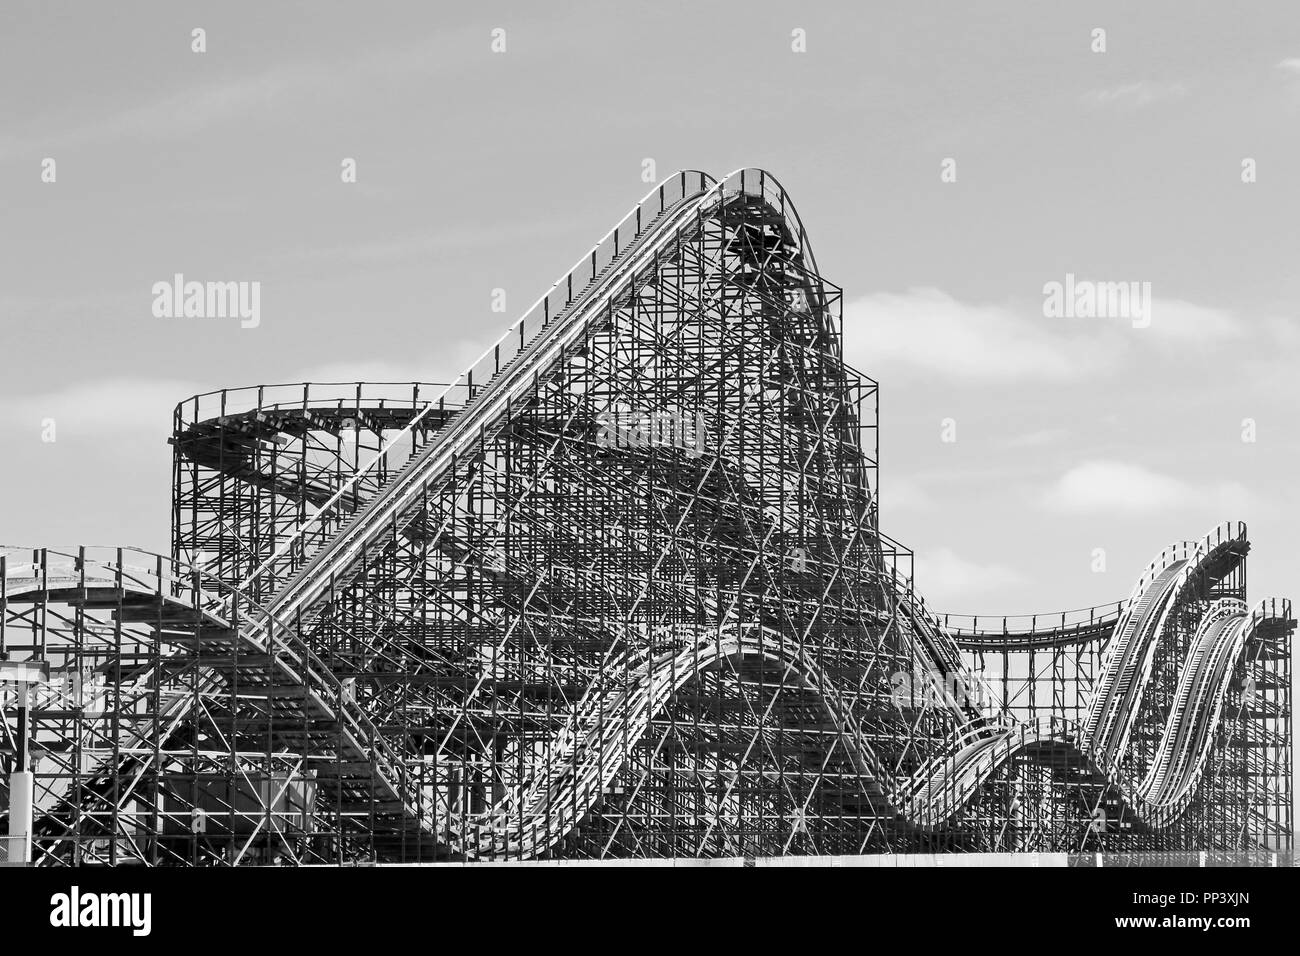 Le Grand Blanc roller coaster sur Morey's Piers, Wildwood, New Jersey, USA Banque D'Images